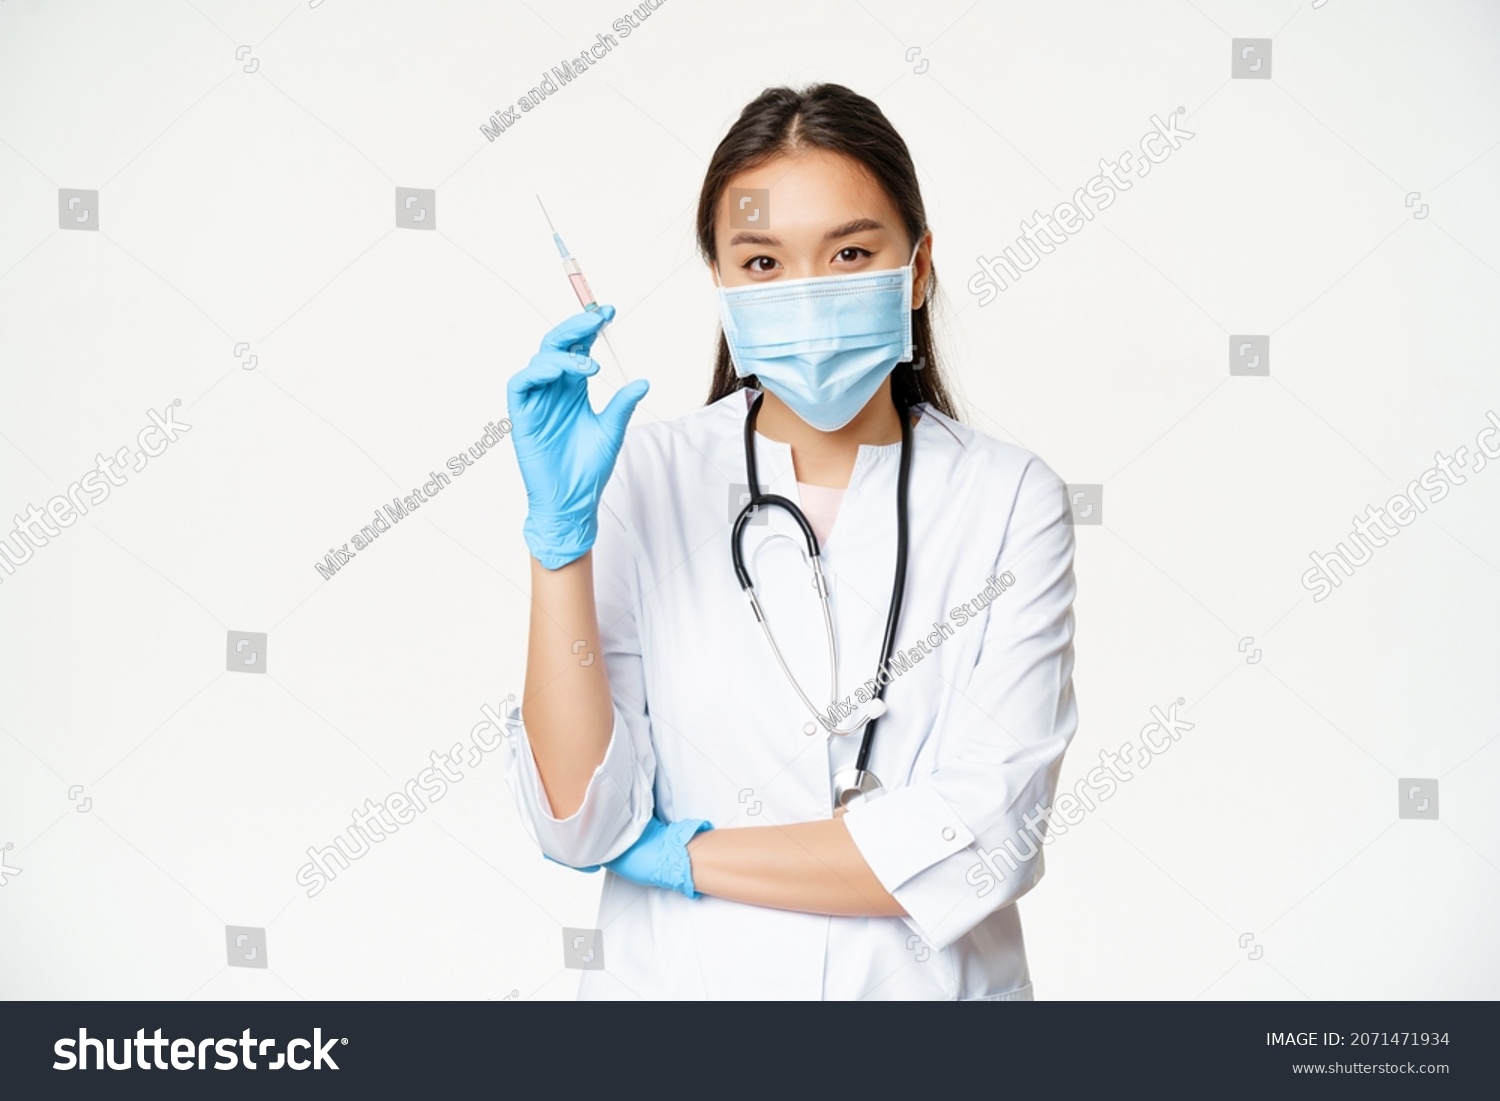 Vaccination and healthcare concept. Asian female doctor, nurse in medical face mask and gloves holding syringe with vaccine, white background #2071471934